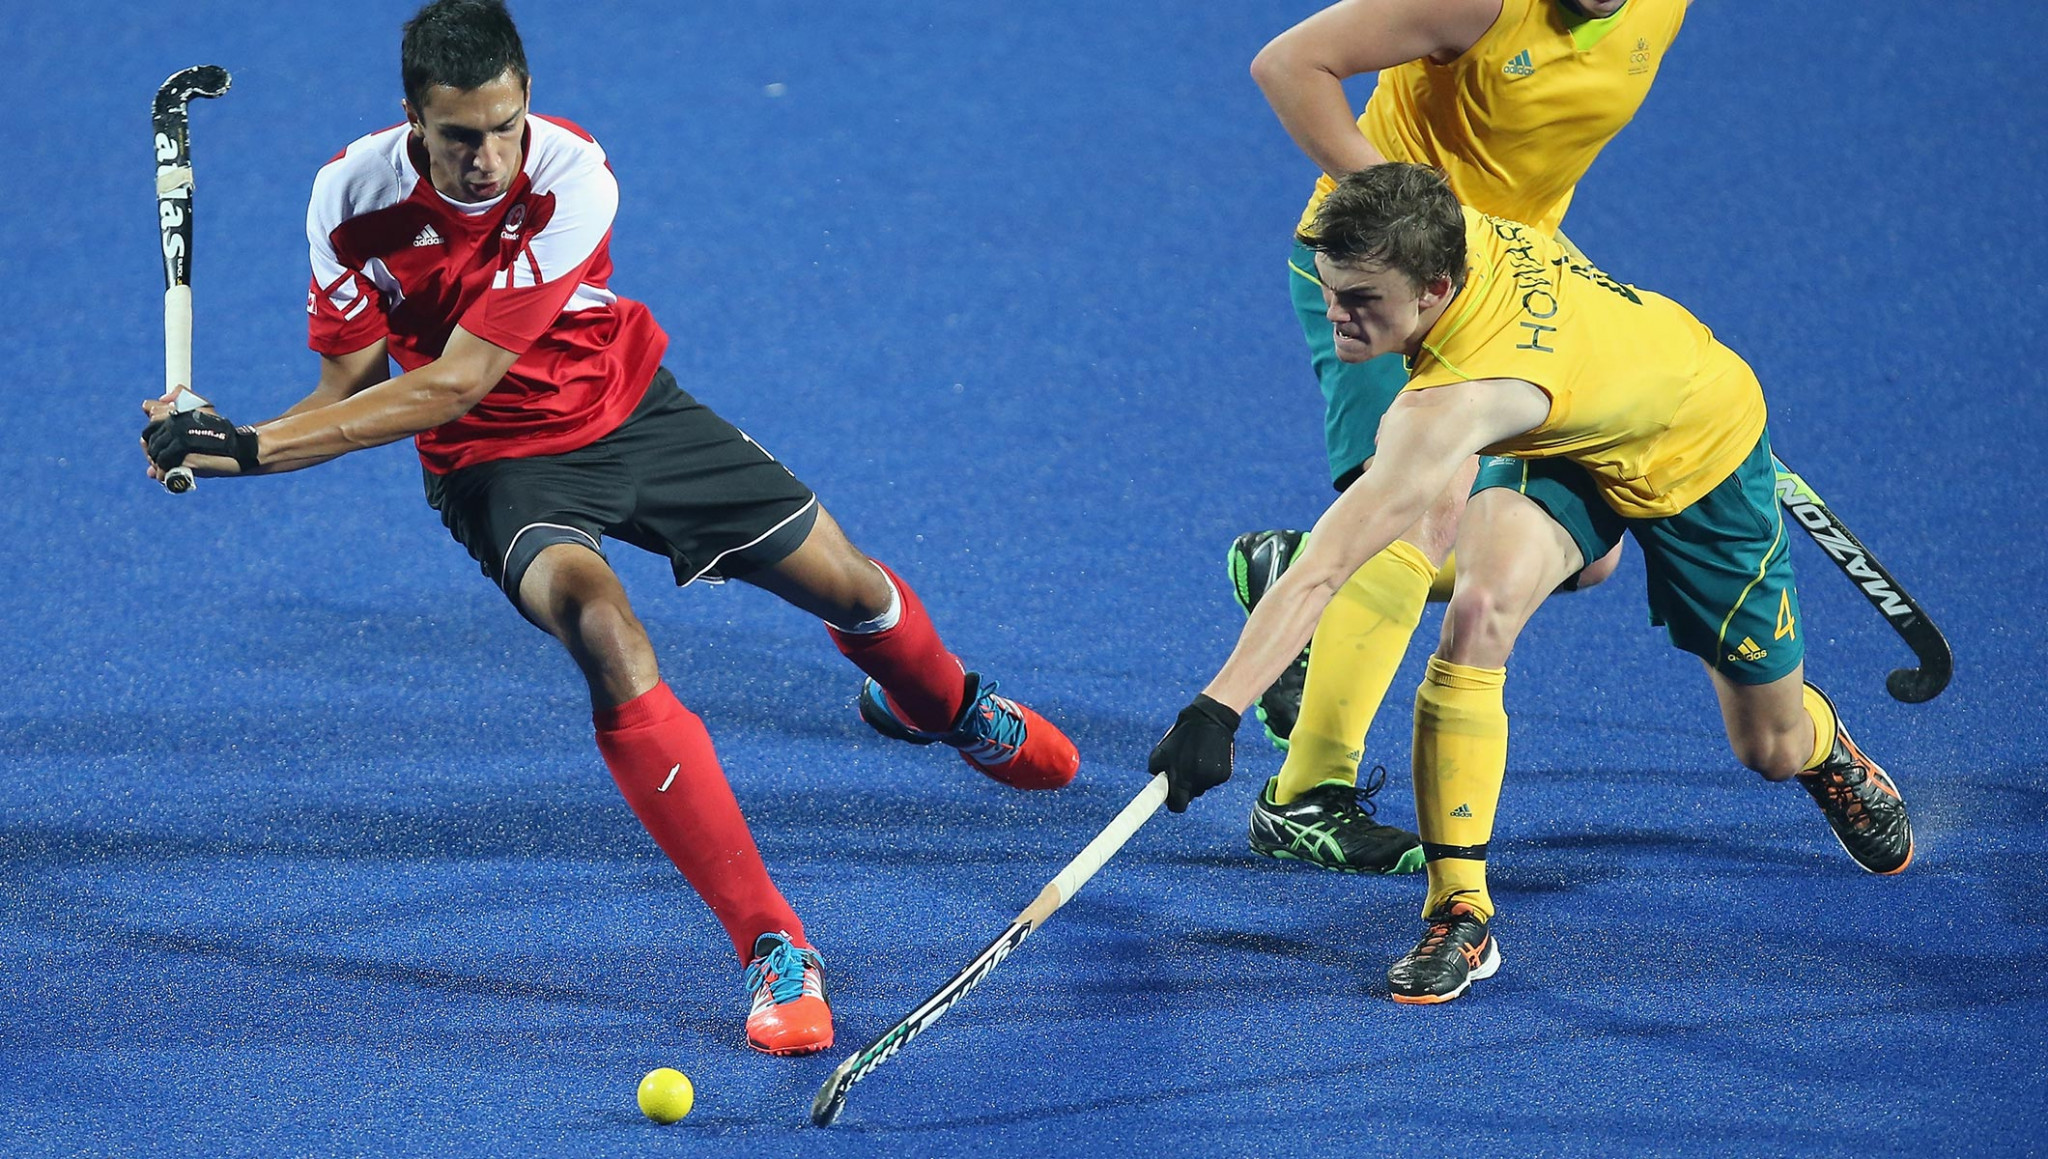 Australia's men won the gold medal when hockey 5s made its debut at the Youth Olympic Games in Nanjing in 2014 having also won at Singapore 2010 when the traditional version of the sport took place ©Getty Images